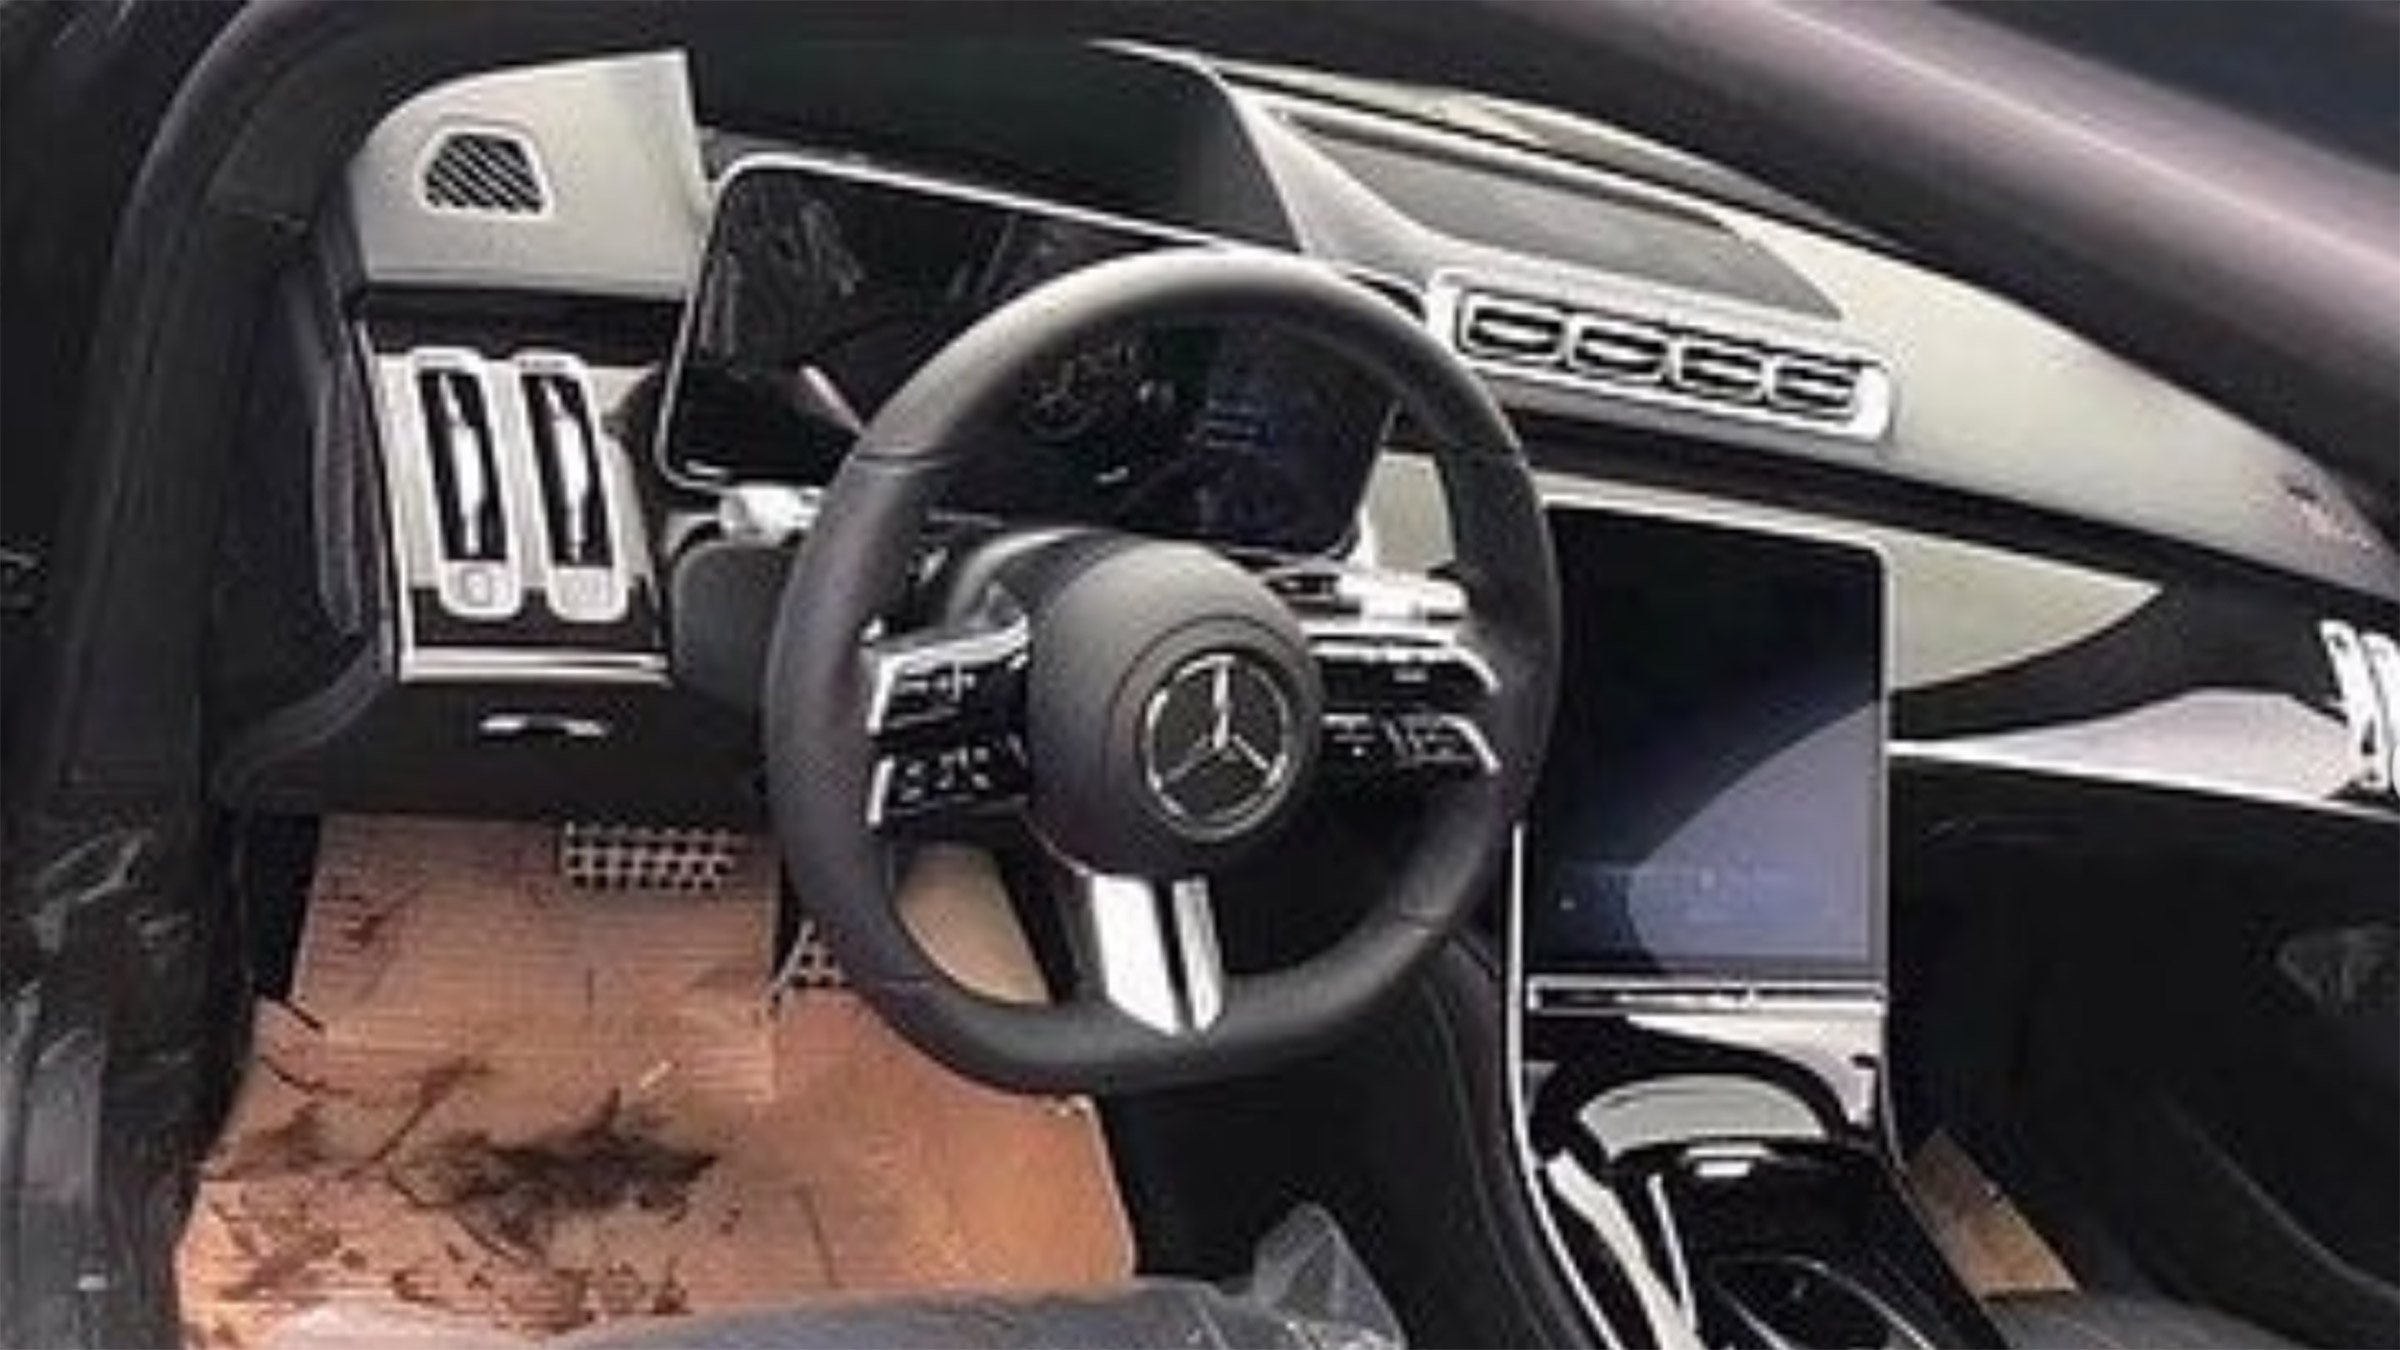 New 2021 Mercedes S-Class leaked revealing revolutionary 